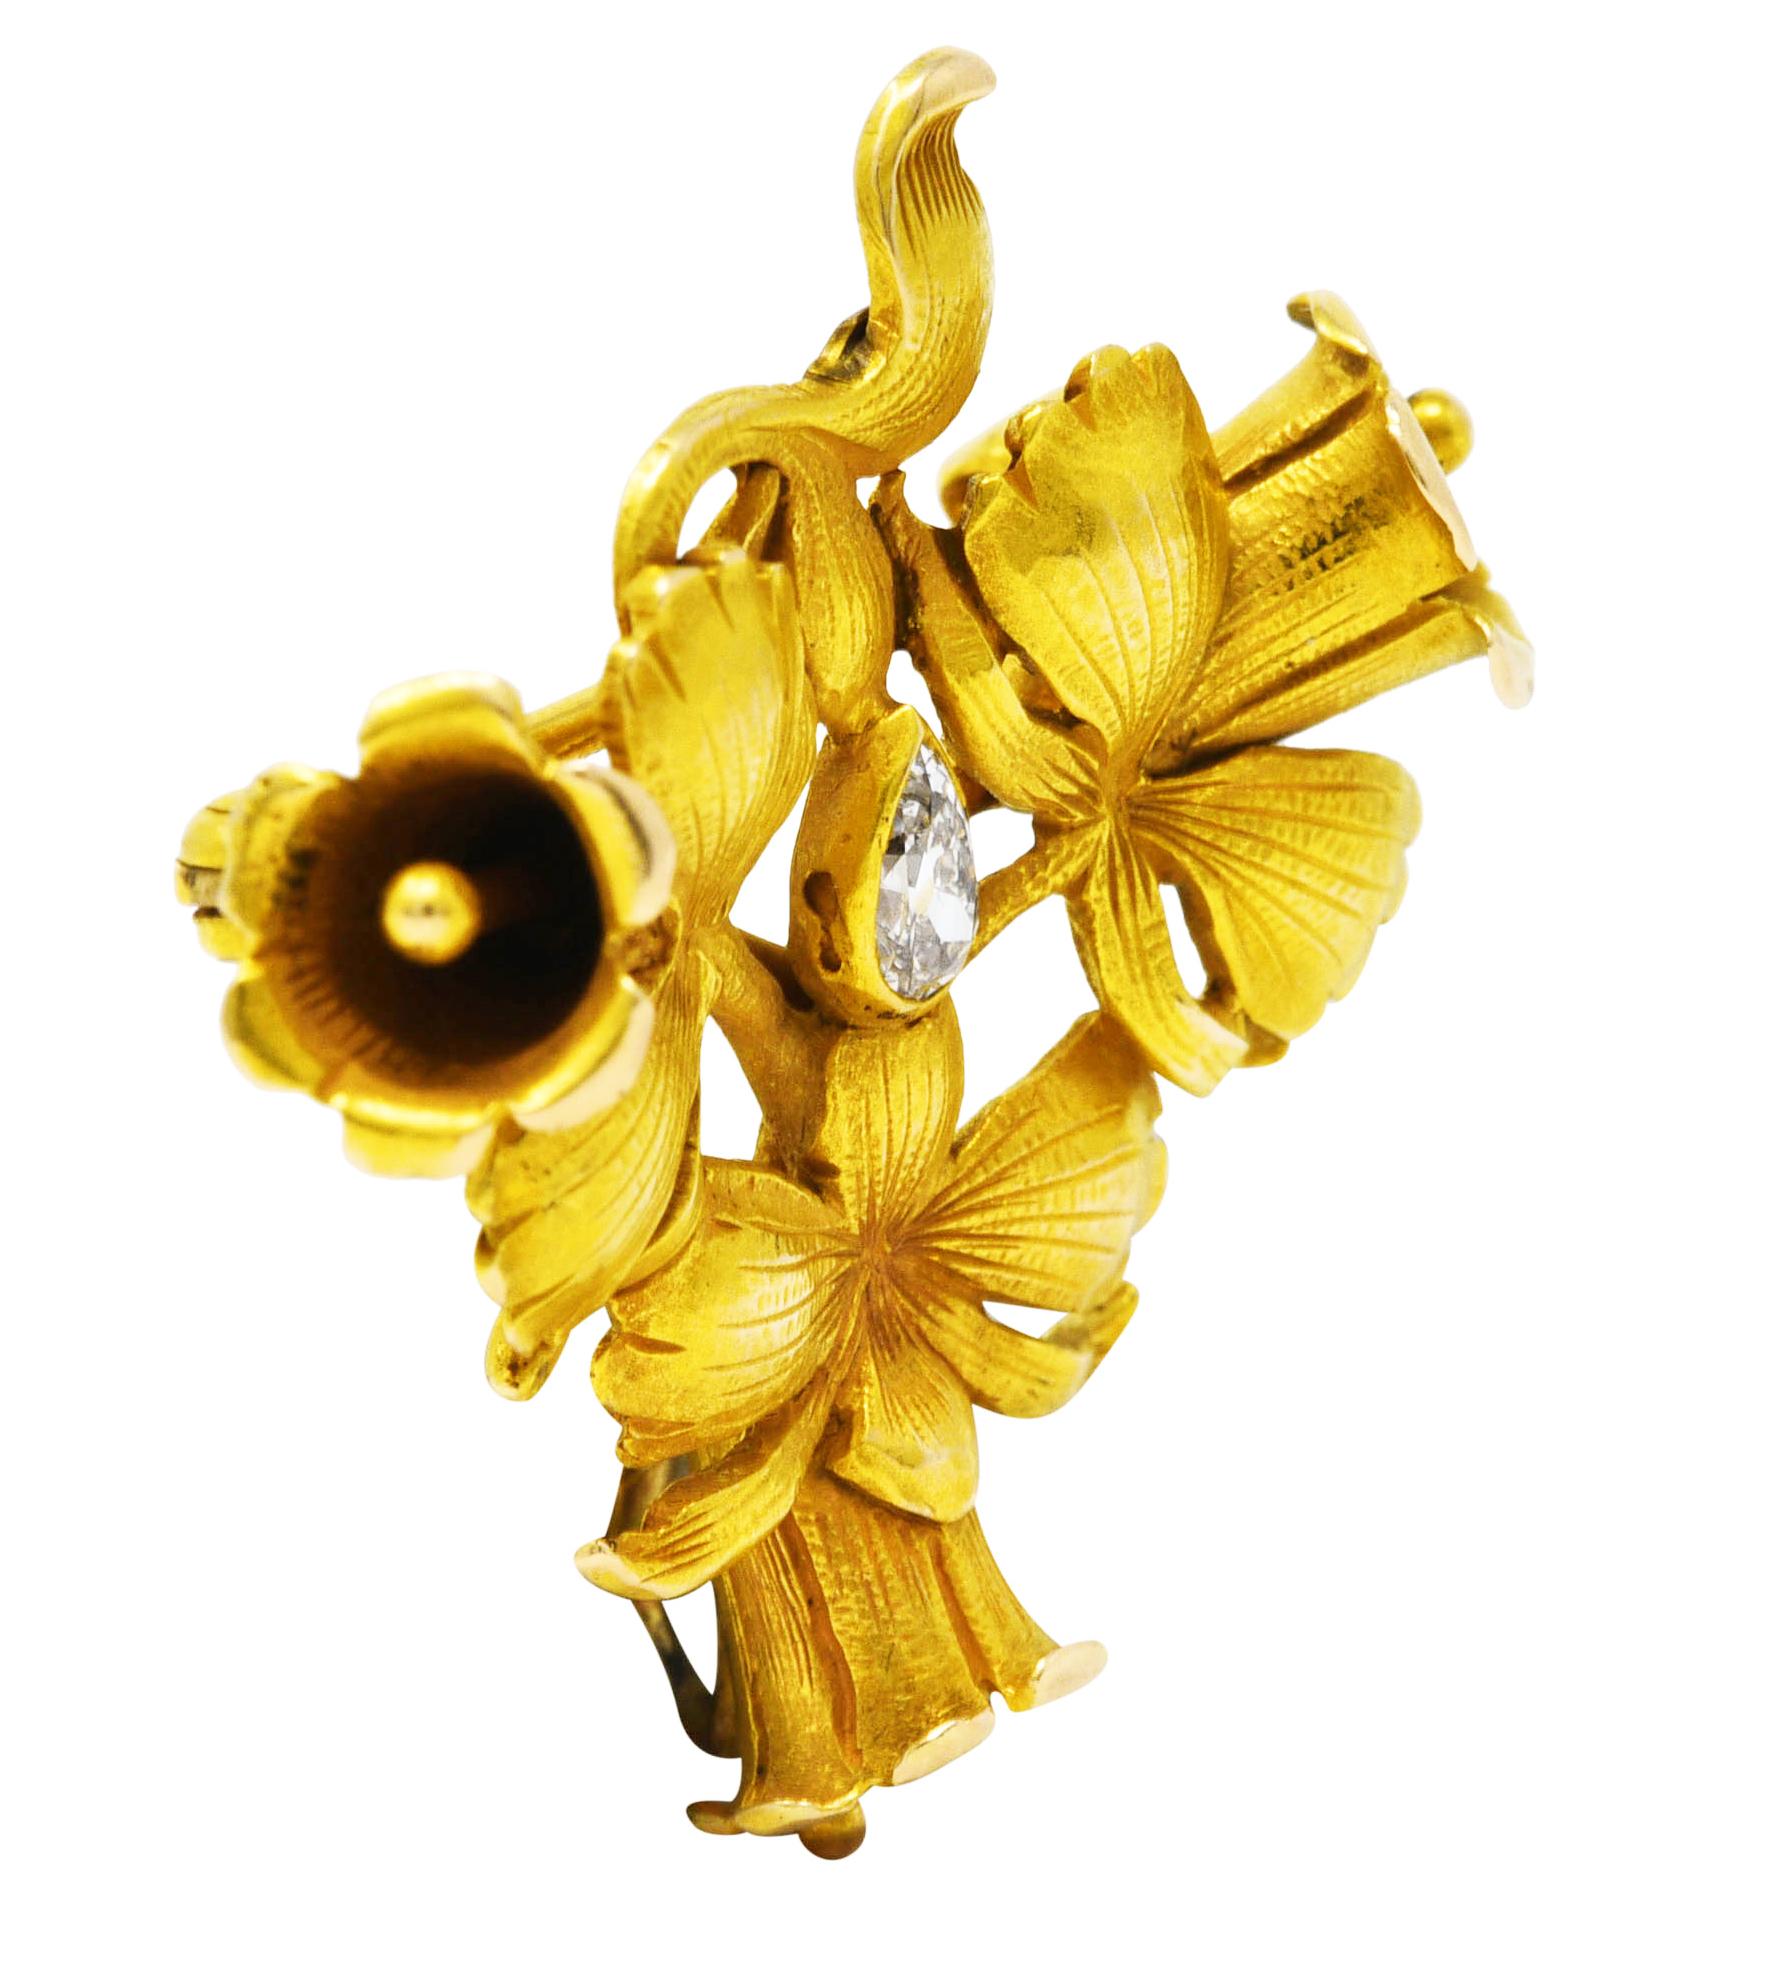 Brooch is designed as three stylized trumpet flowers. Highly rendered, dimensional, and texturous. Centering a bezel set pear cut diamond. Weighing approximately 0.15 carat with G color and VS clarity. Completed by a pin stem with locking closure